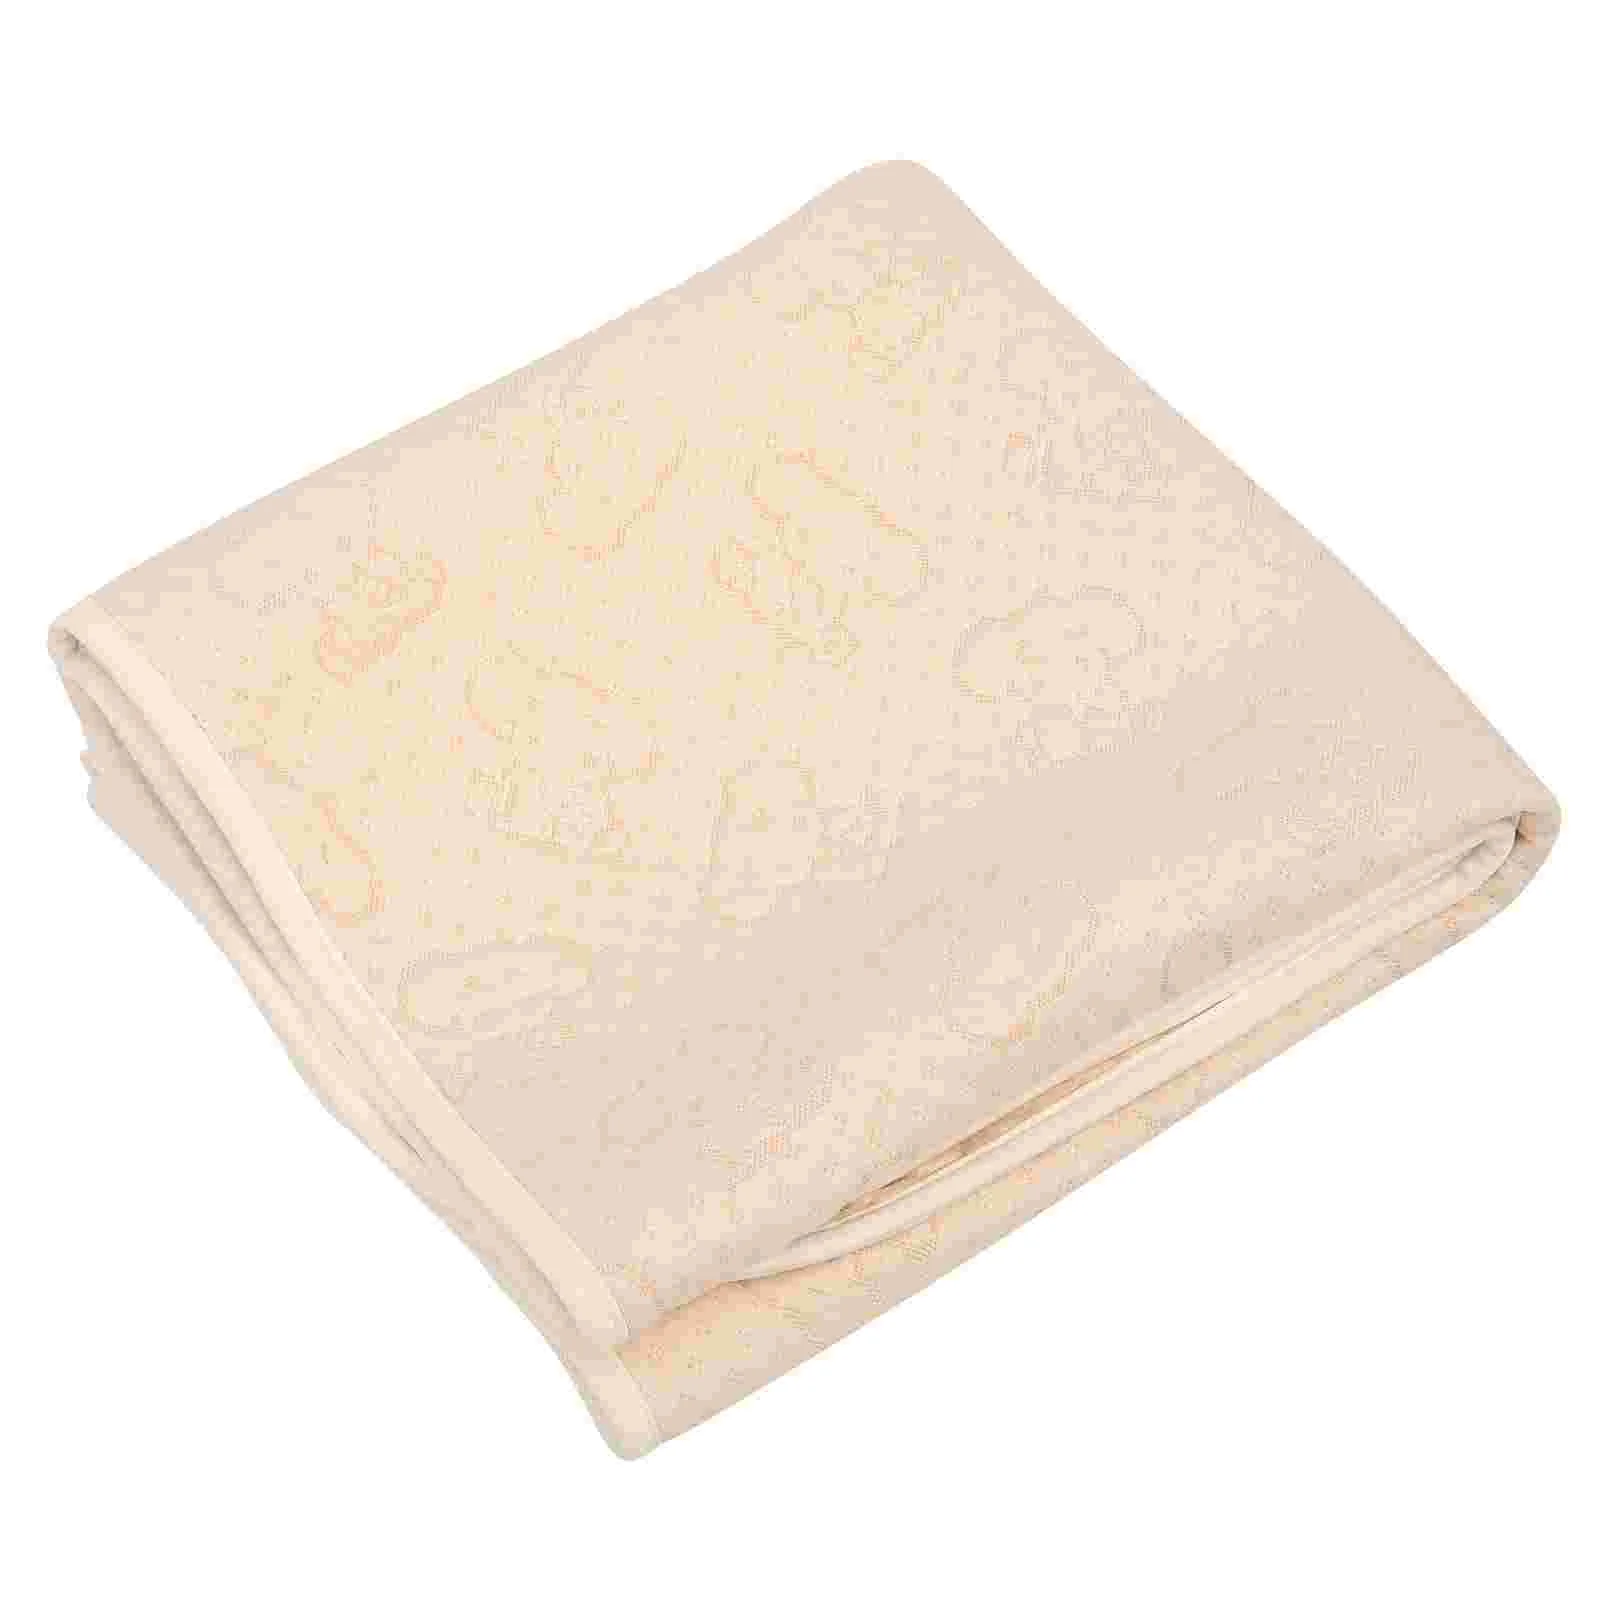 

Urine Pad Bed Pads Breathable Menstruation Mats Urinal Elderly Nursing Cotton Incontinence for Women Baby Urinary